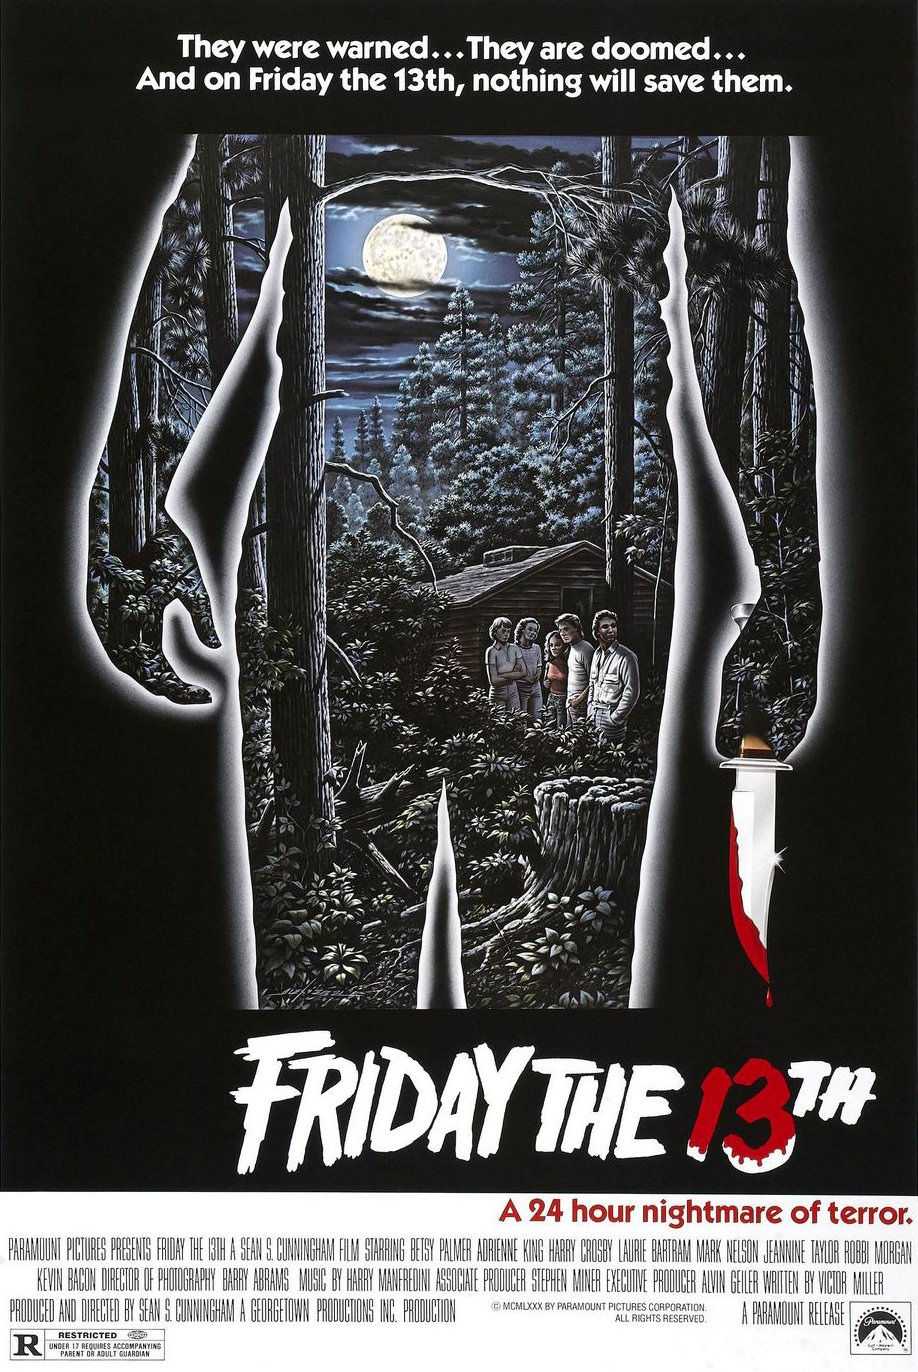 A tribute to Friday the 13th (1980)